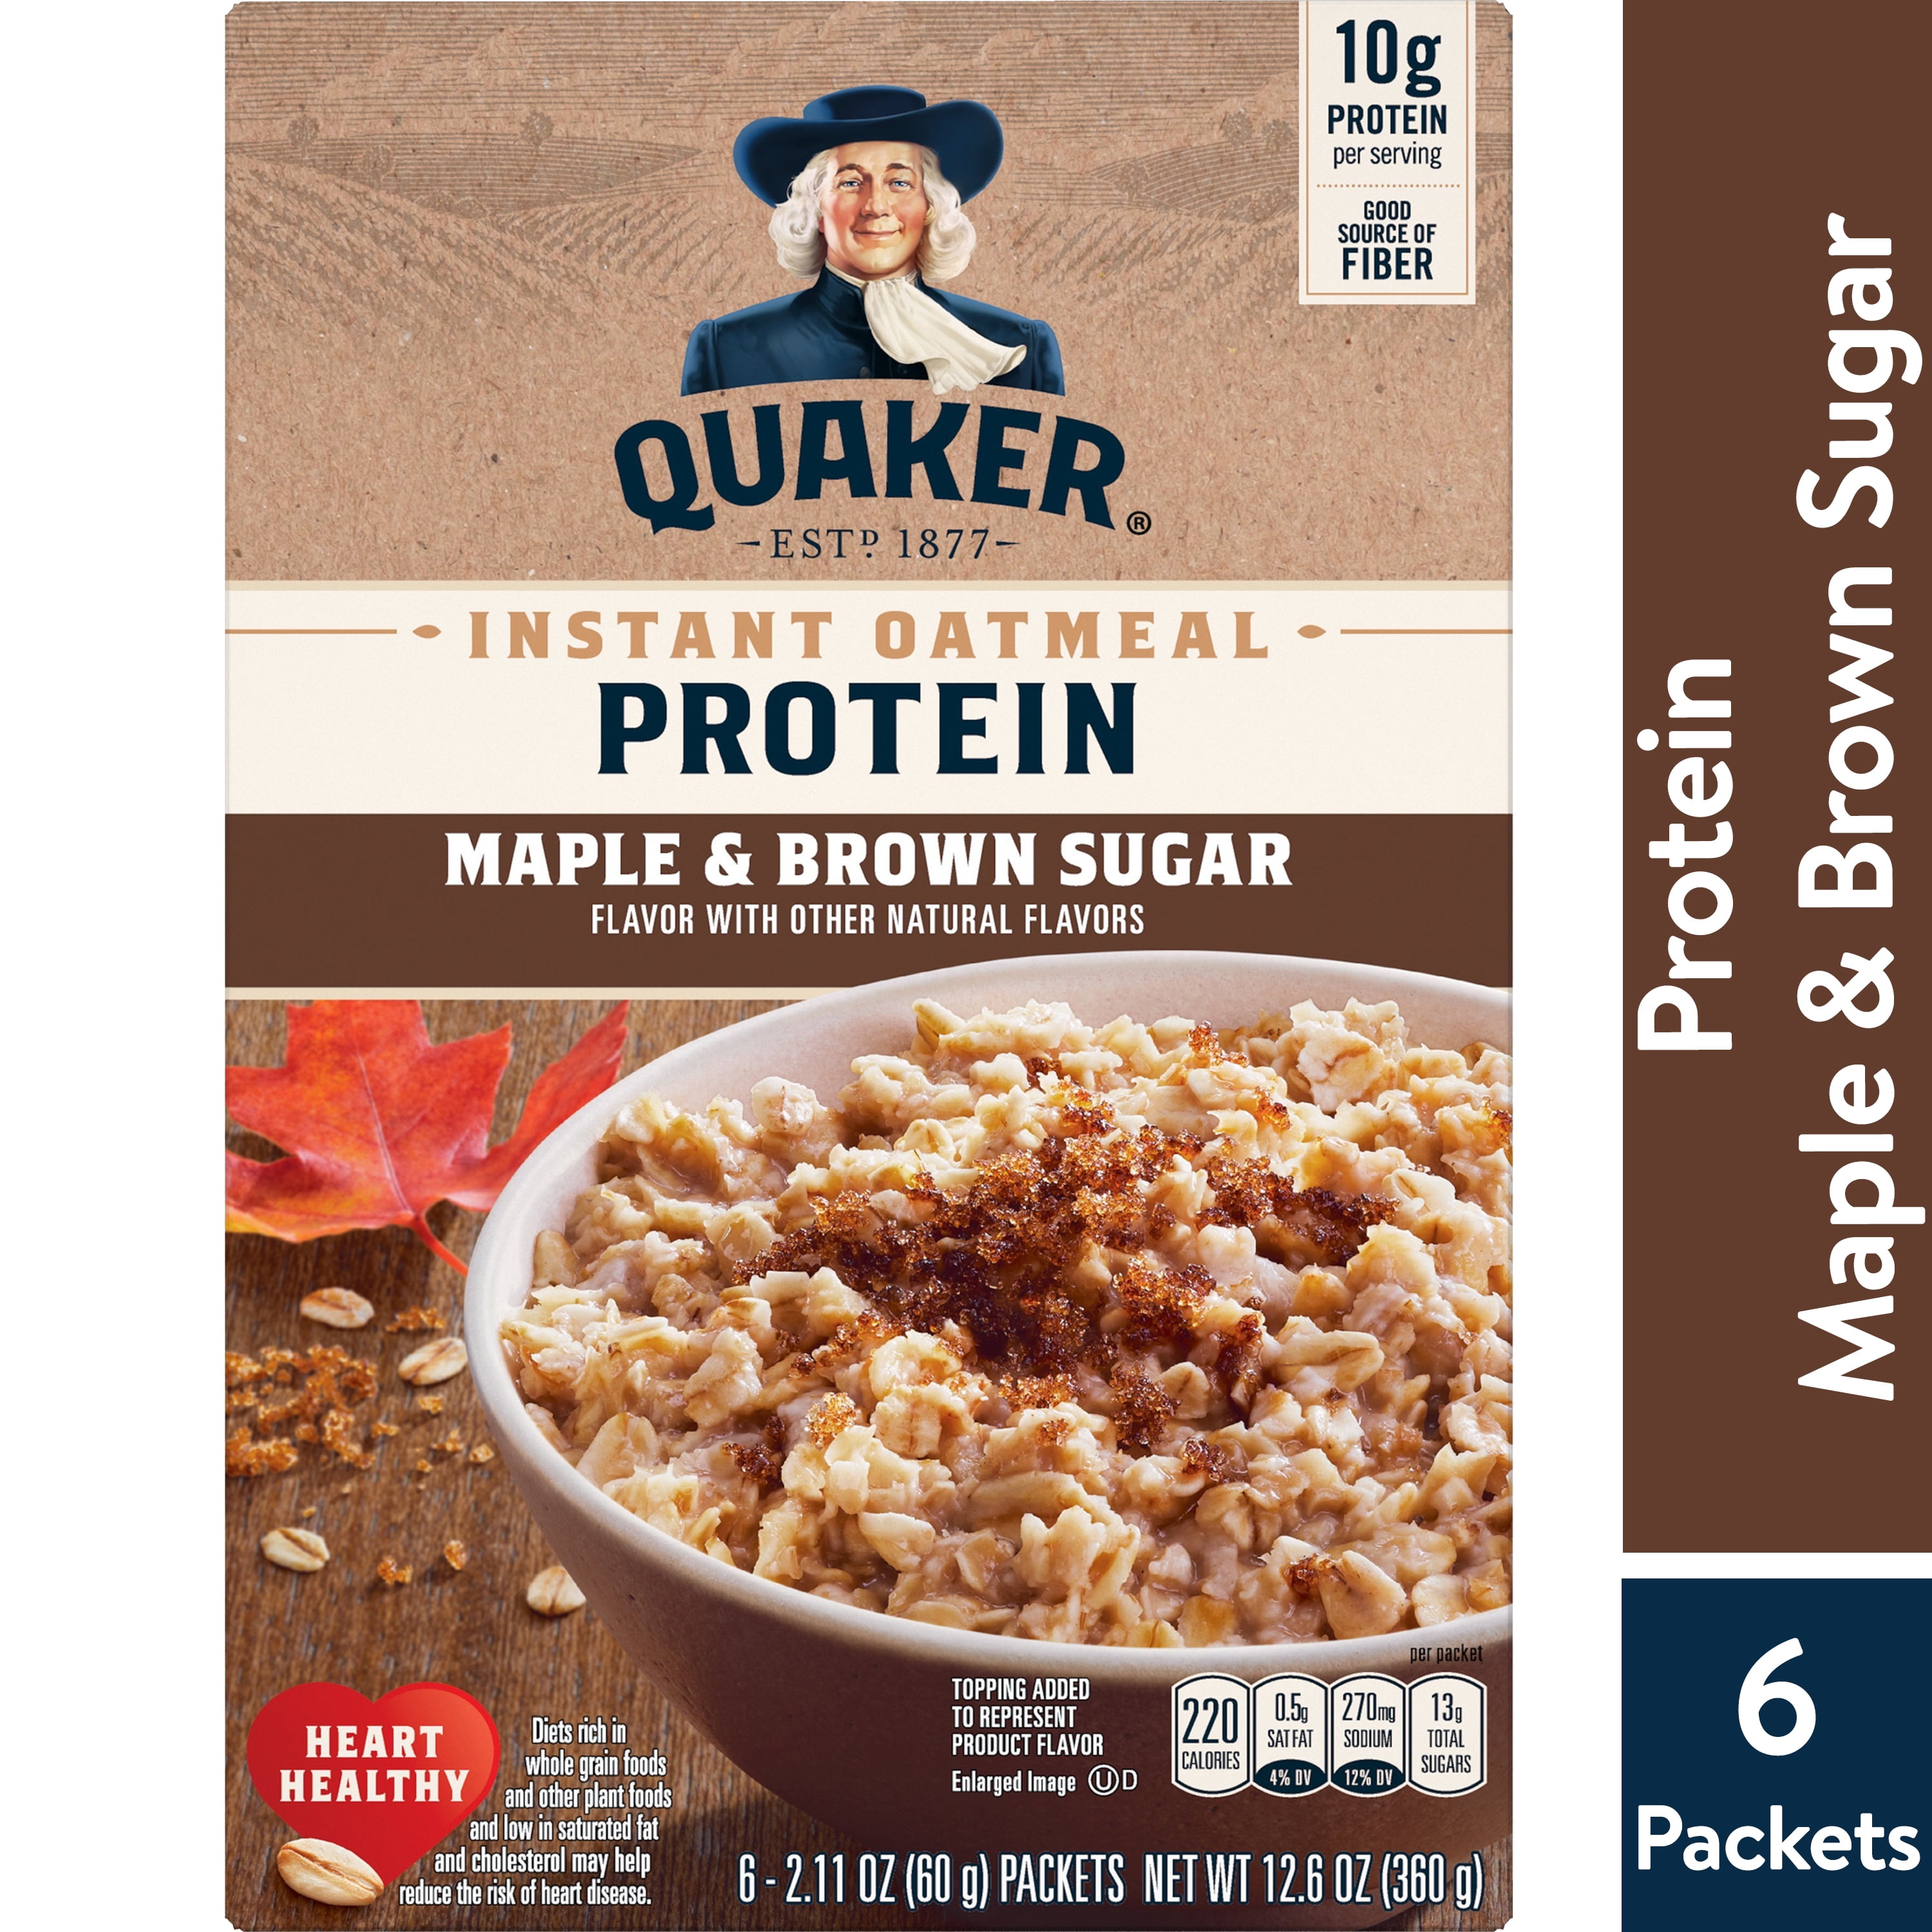 Quaker, Protein Instant Oatmeal, Maple & Brown Sugar, 2.11 oz, 6 Packets